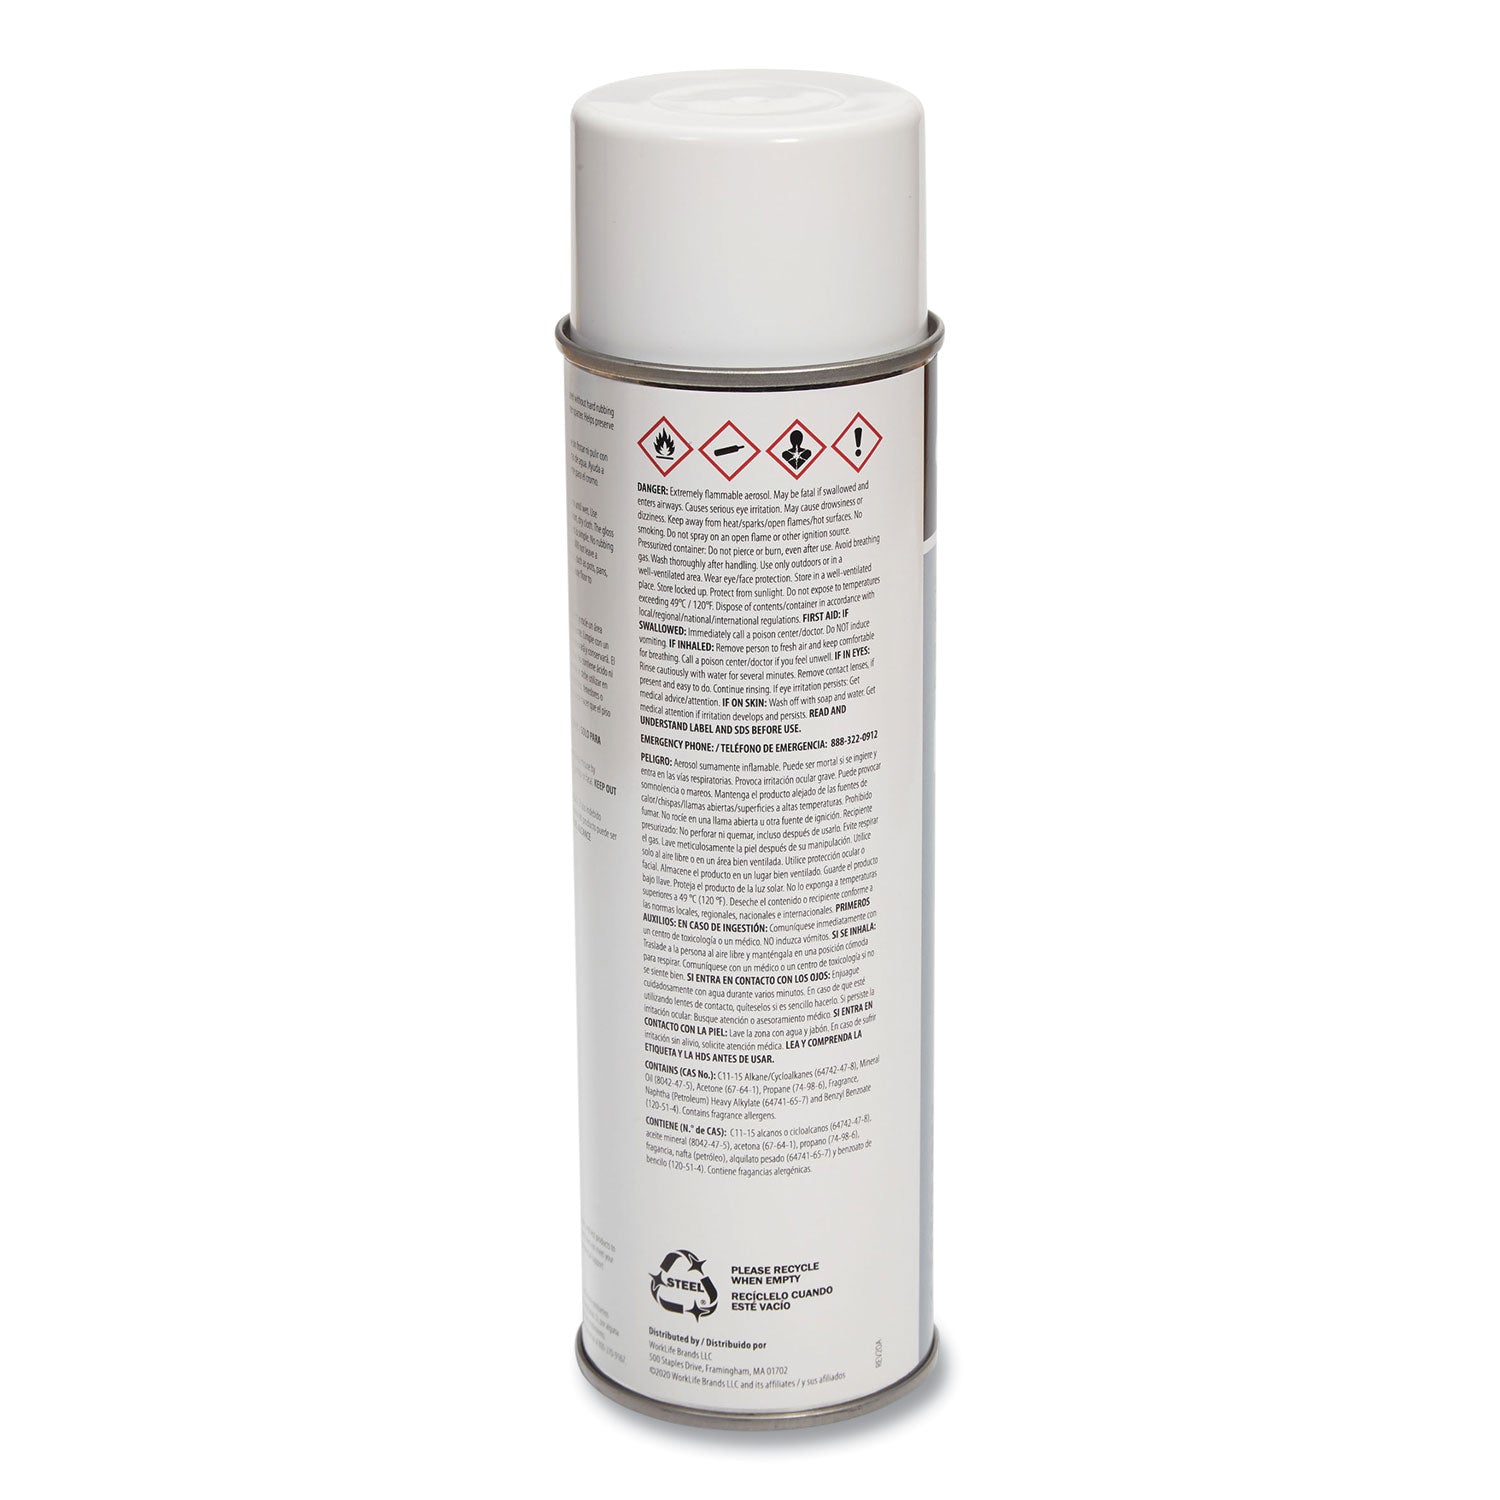 stainless-steel-cleaner-and-polish-lemon-scent-15-oz-aerosol-spray-6-carton_cwz58497a50879 - 4